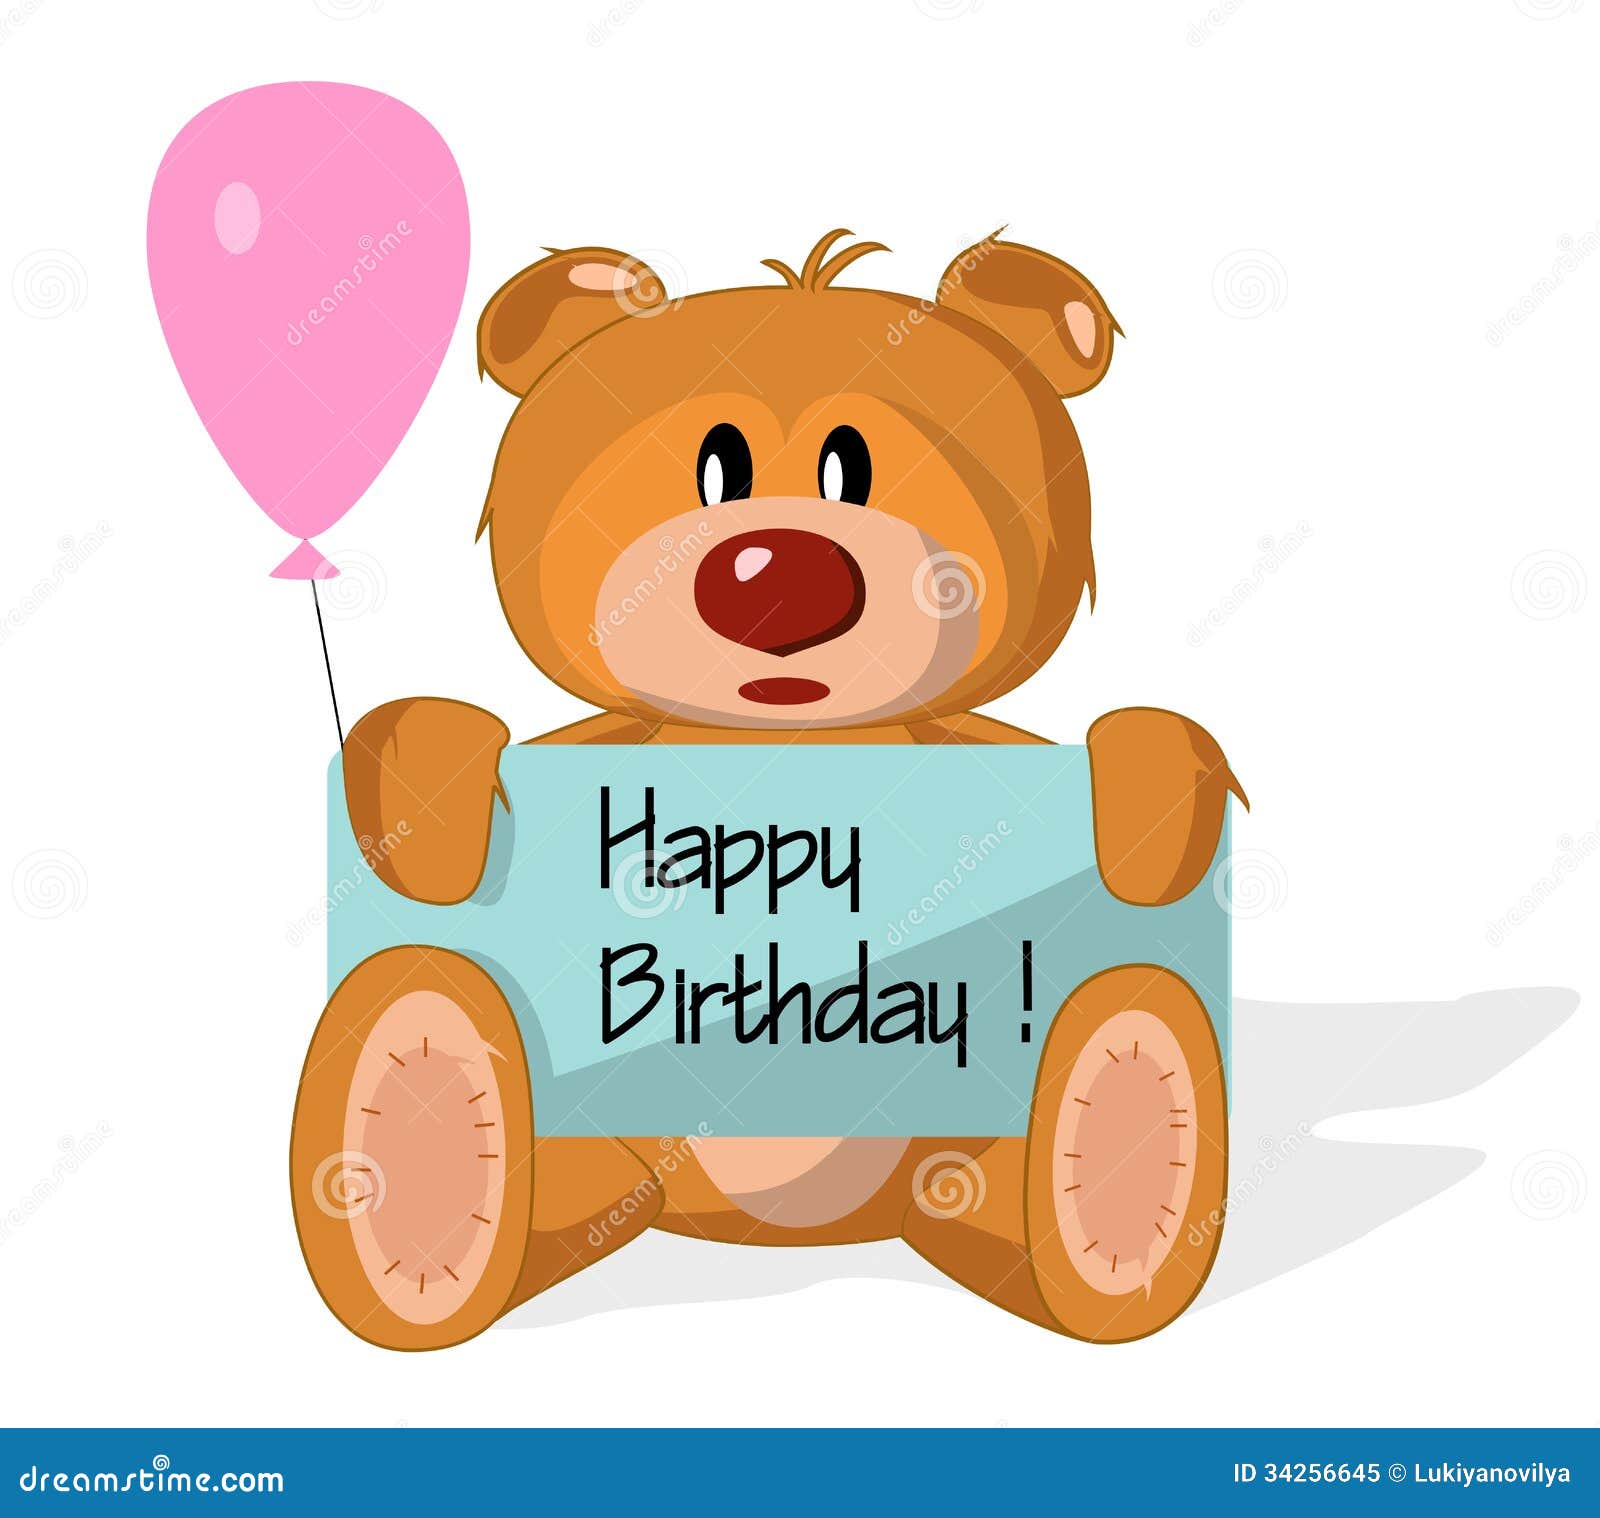 Bear Toy with Congratulation Stock Vector - Illustration of animal ...